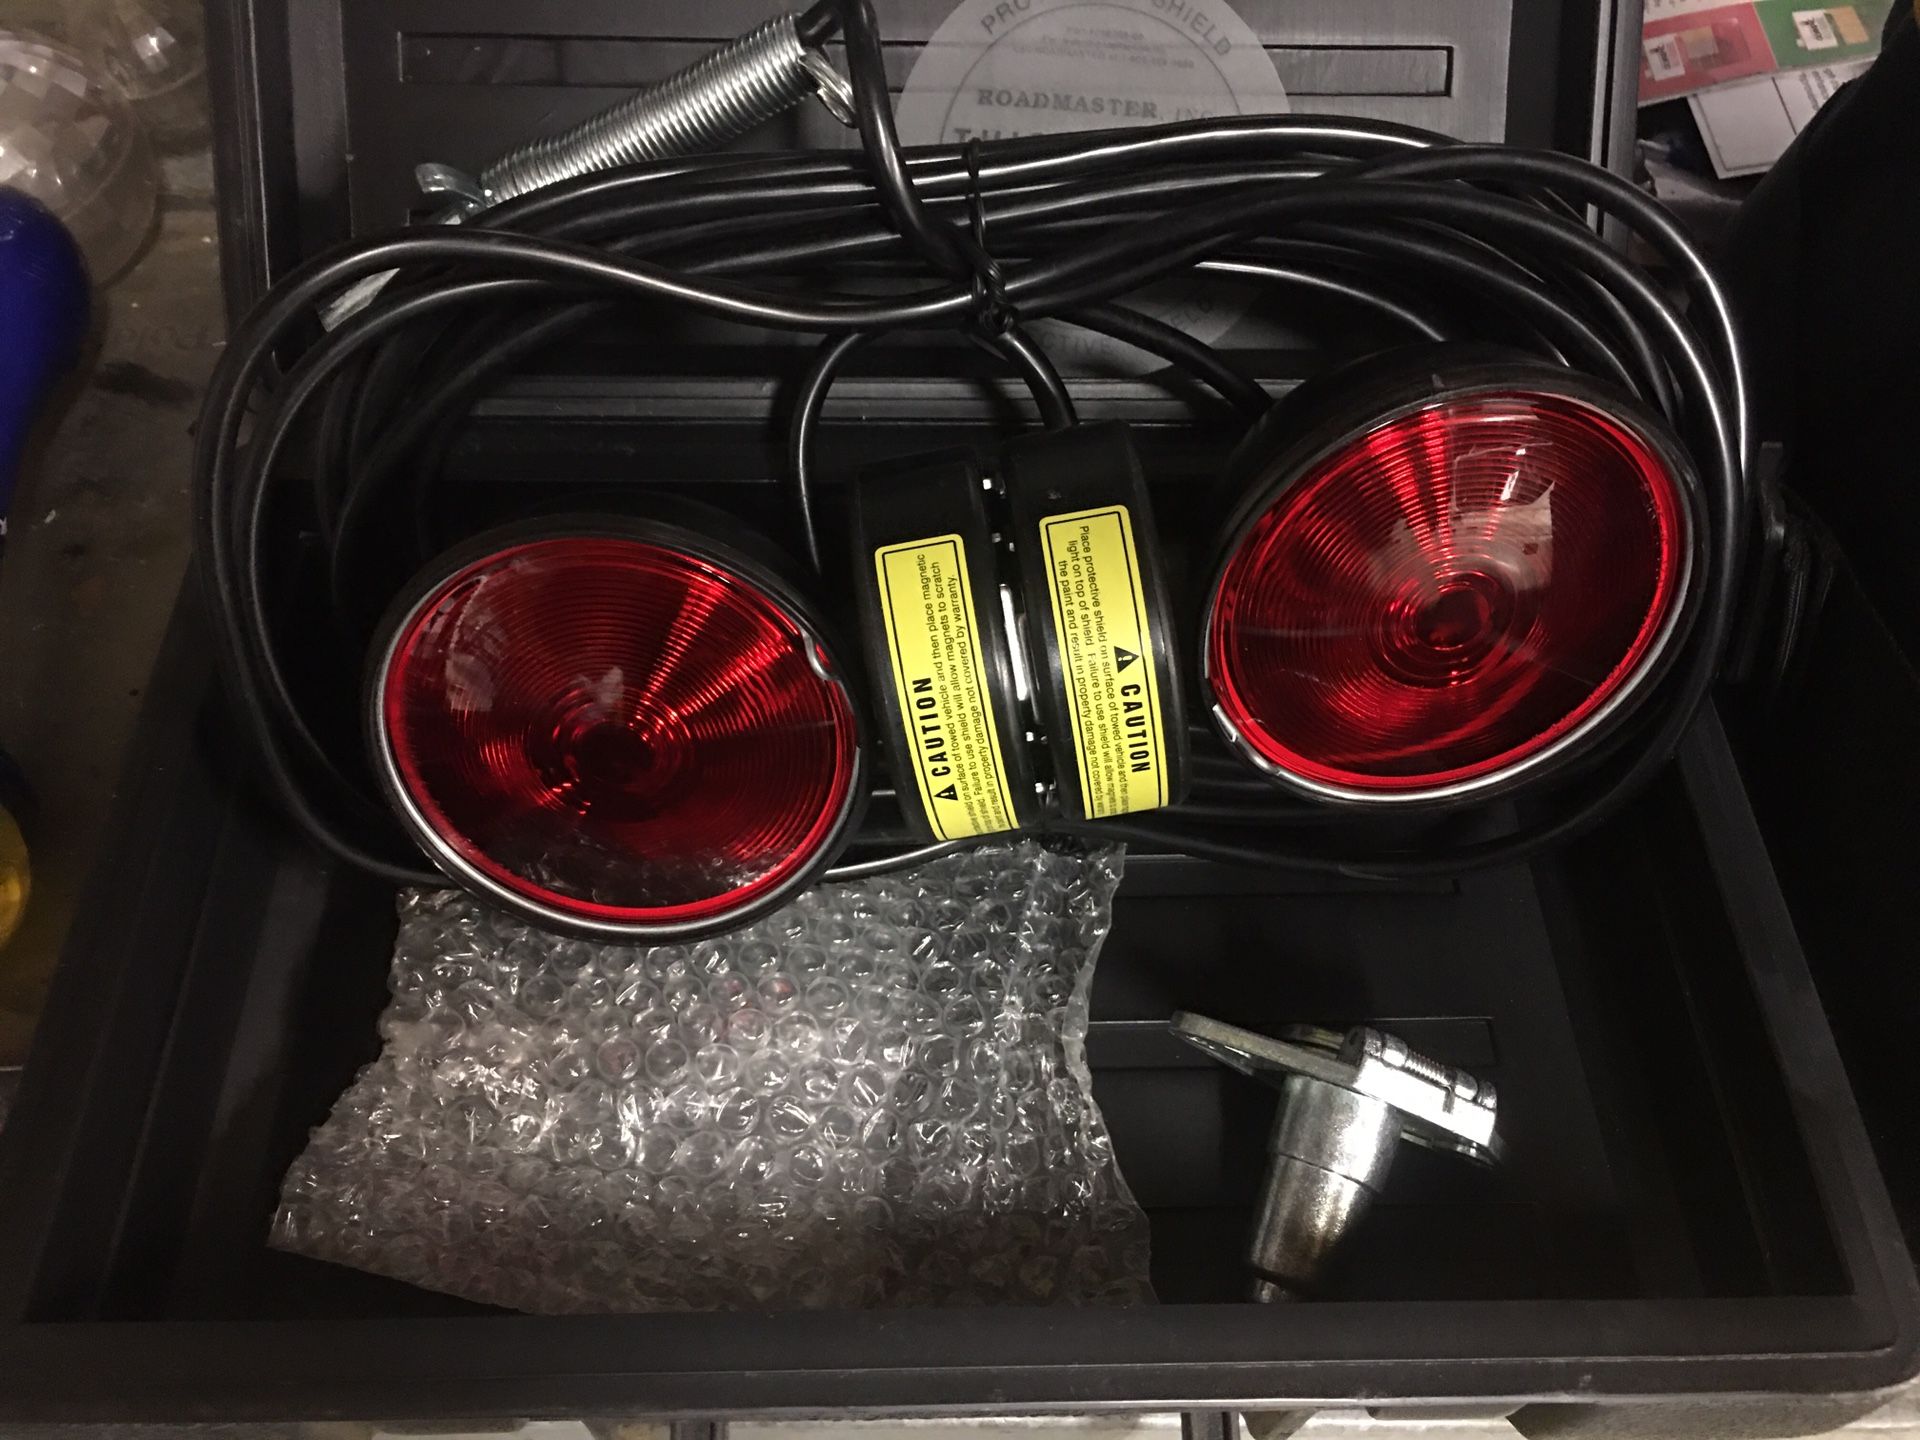 Road master tow lights with magnetic base and carrying case